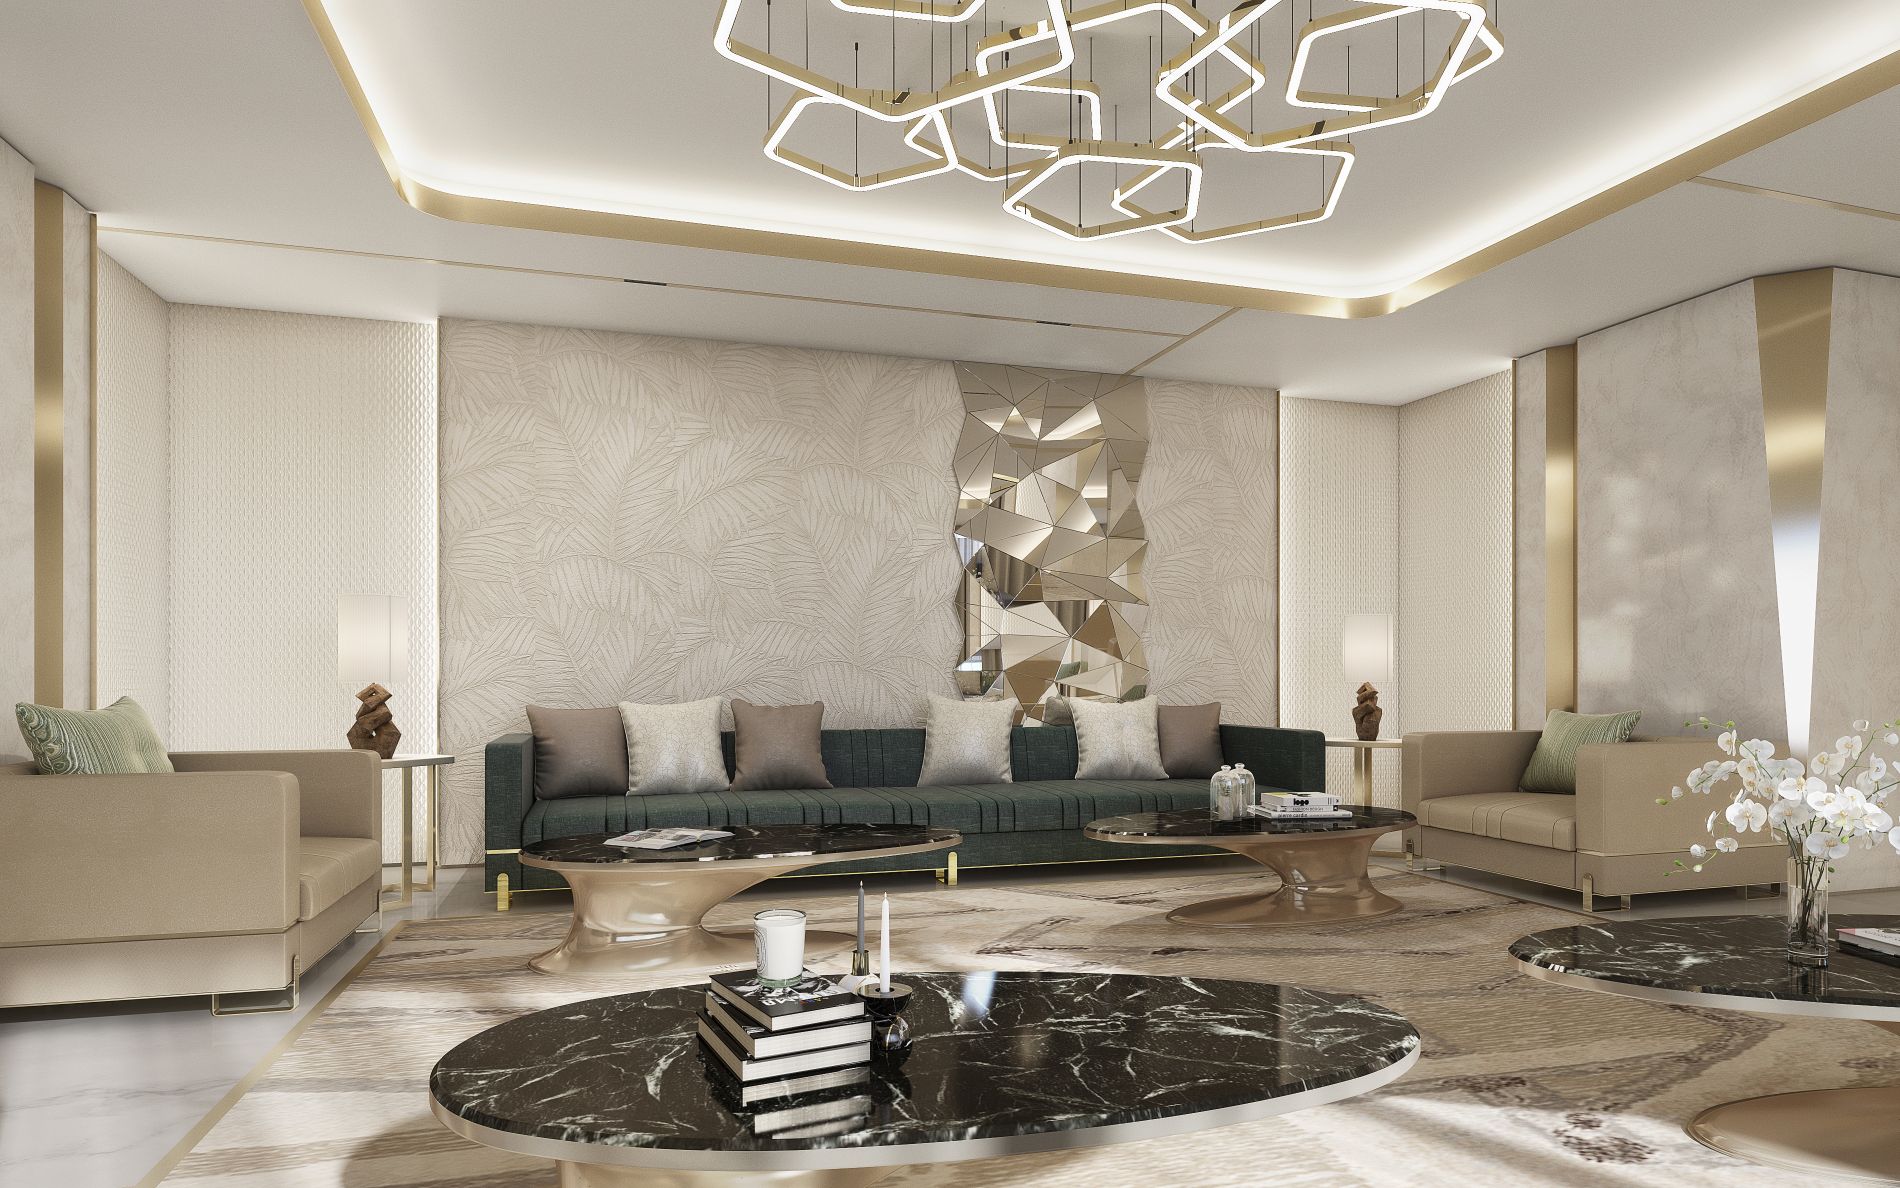 Office and Retail Interior Design and Fit-Out Dubai and KSA